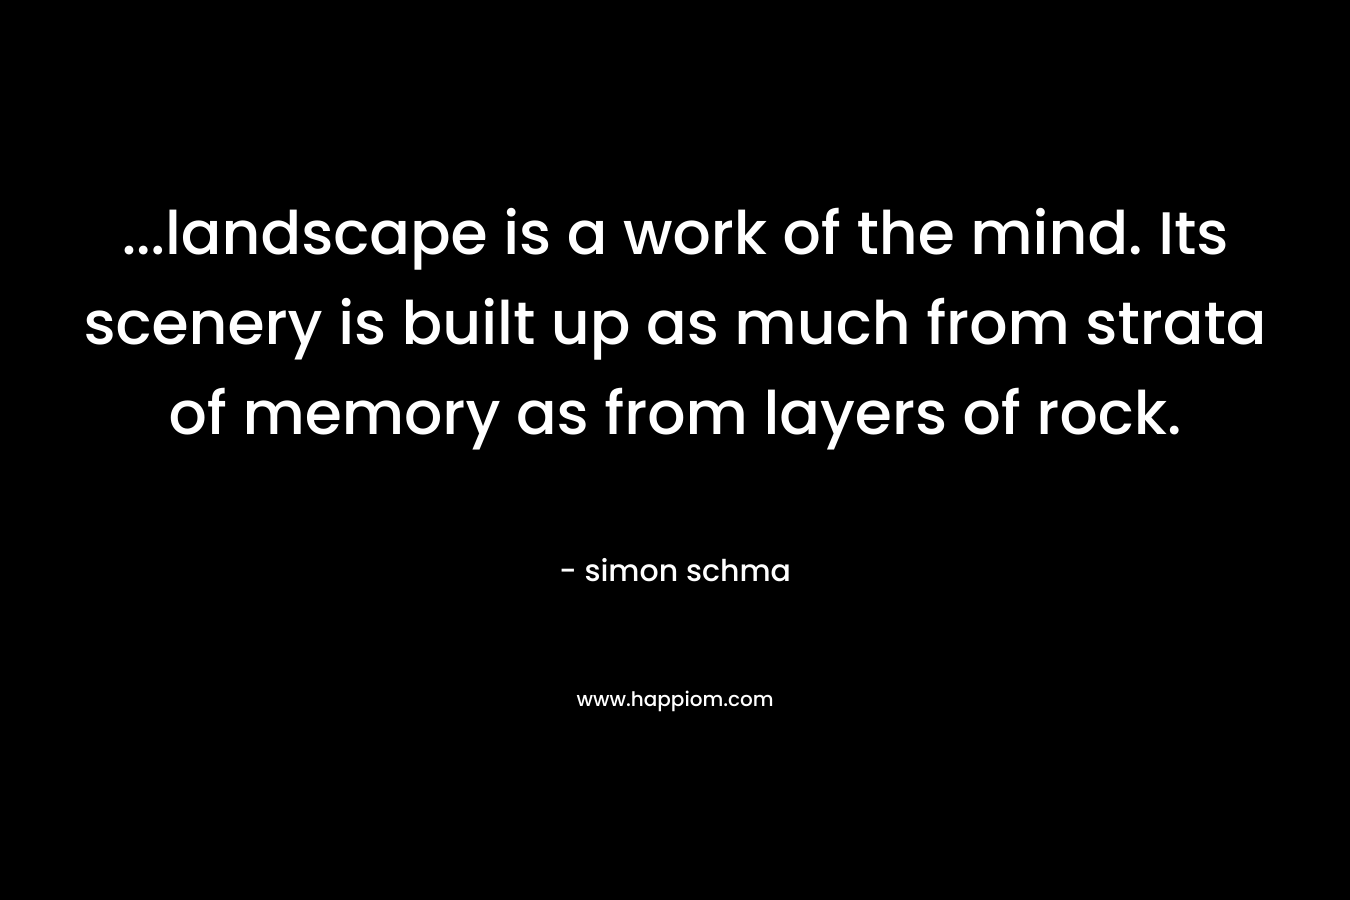 ...landscape is a work of the mind. Its scenery is built up as much from strata of memory as from layers of rock.